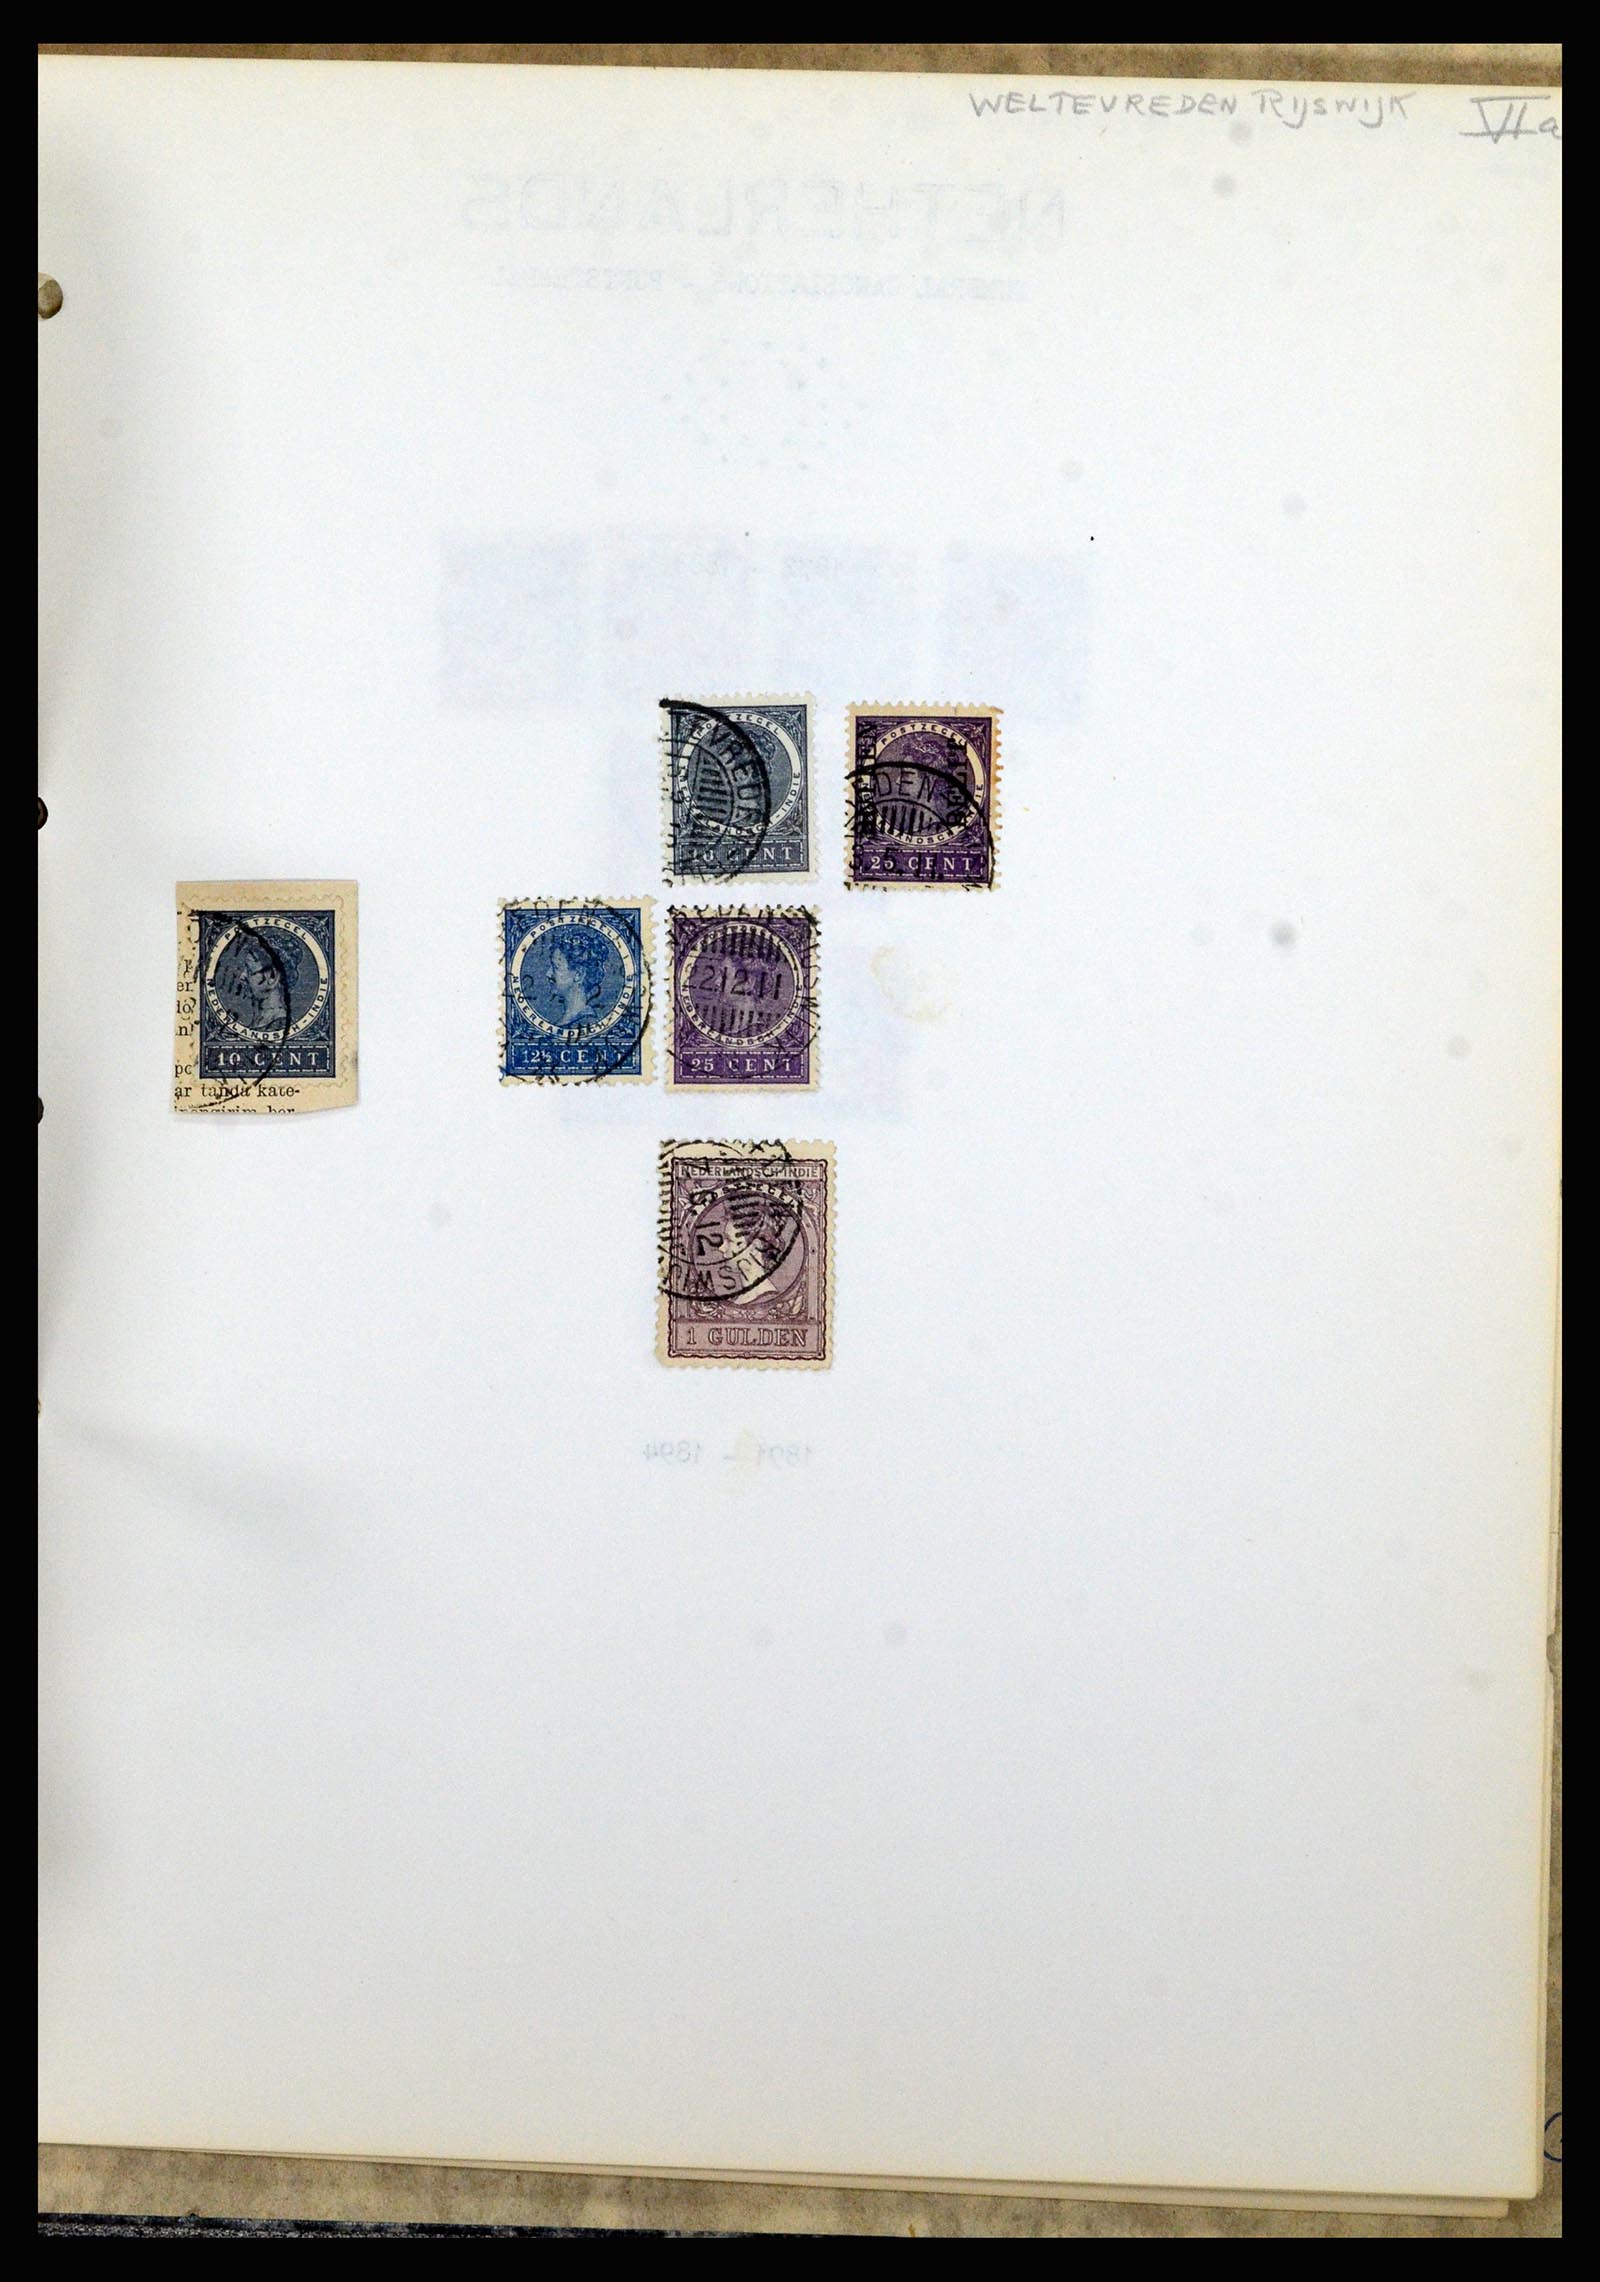 36841 193 - Stamp collection 36841 Dutch east Indies short bar cancels.